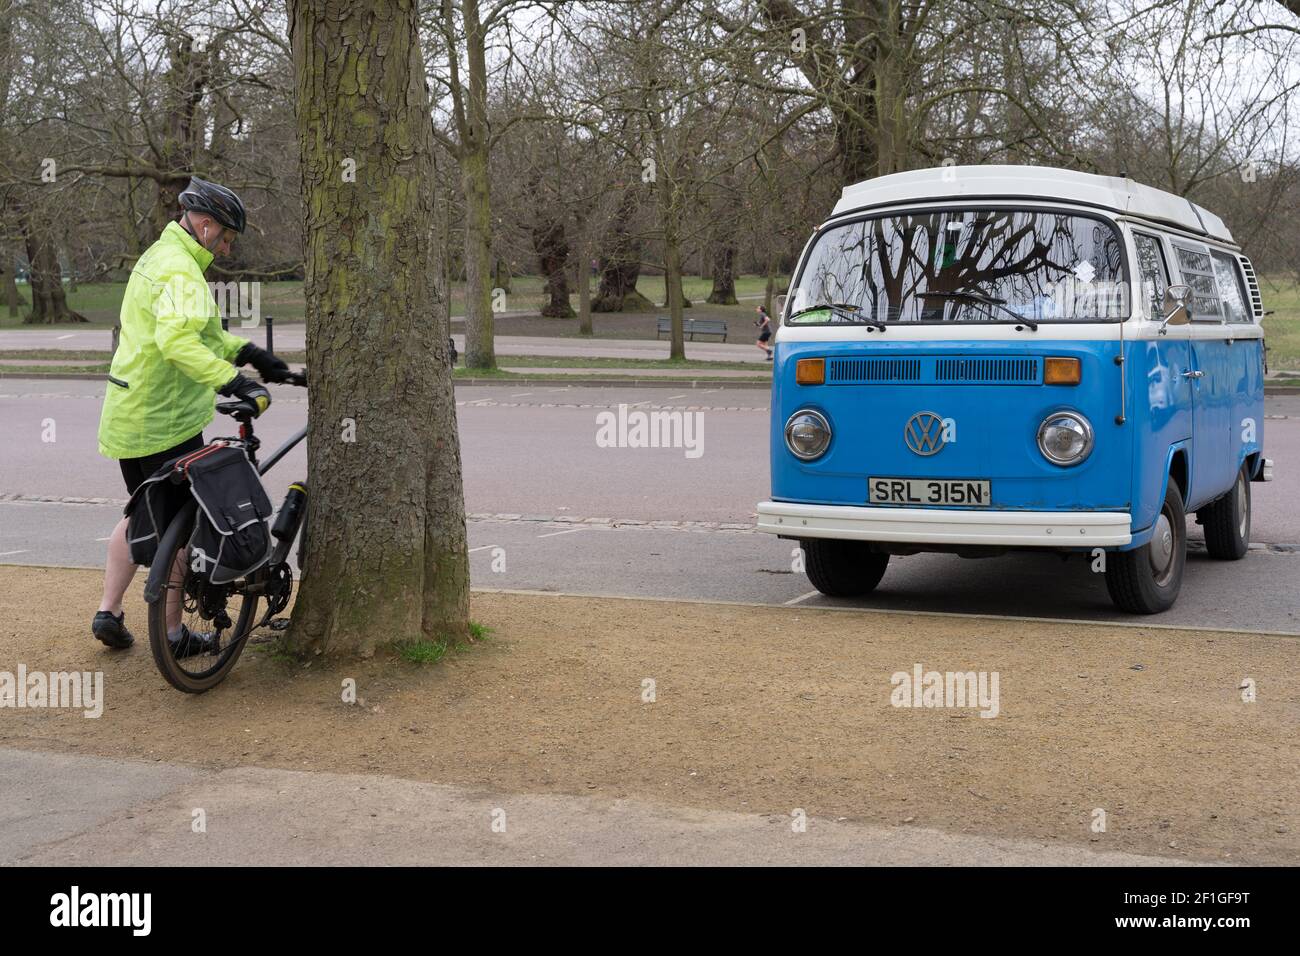 man cyclist in yellow high visibility jacket park bike agains a tree next to VOLKSWAGEN MOTOR CARAVAN in blue and white in London Greenwich park Stock Photo